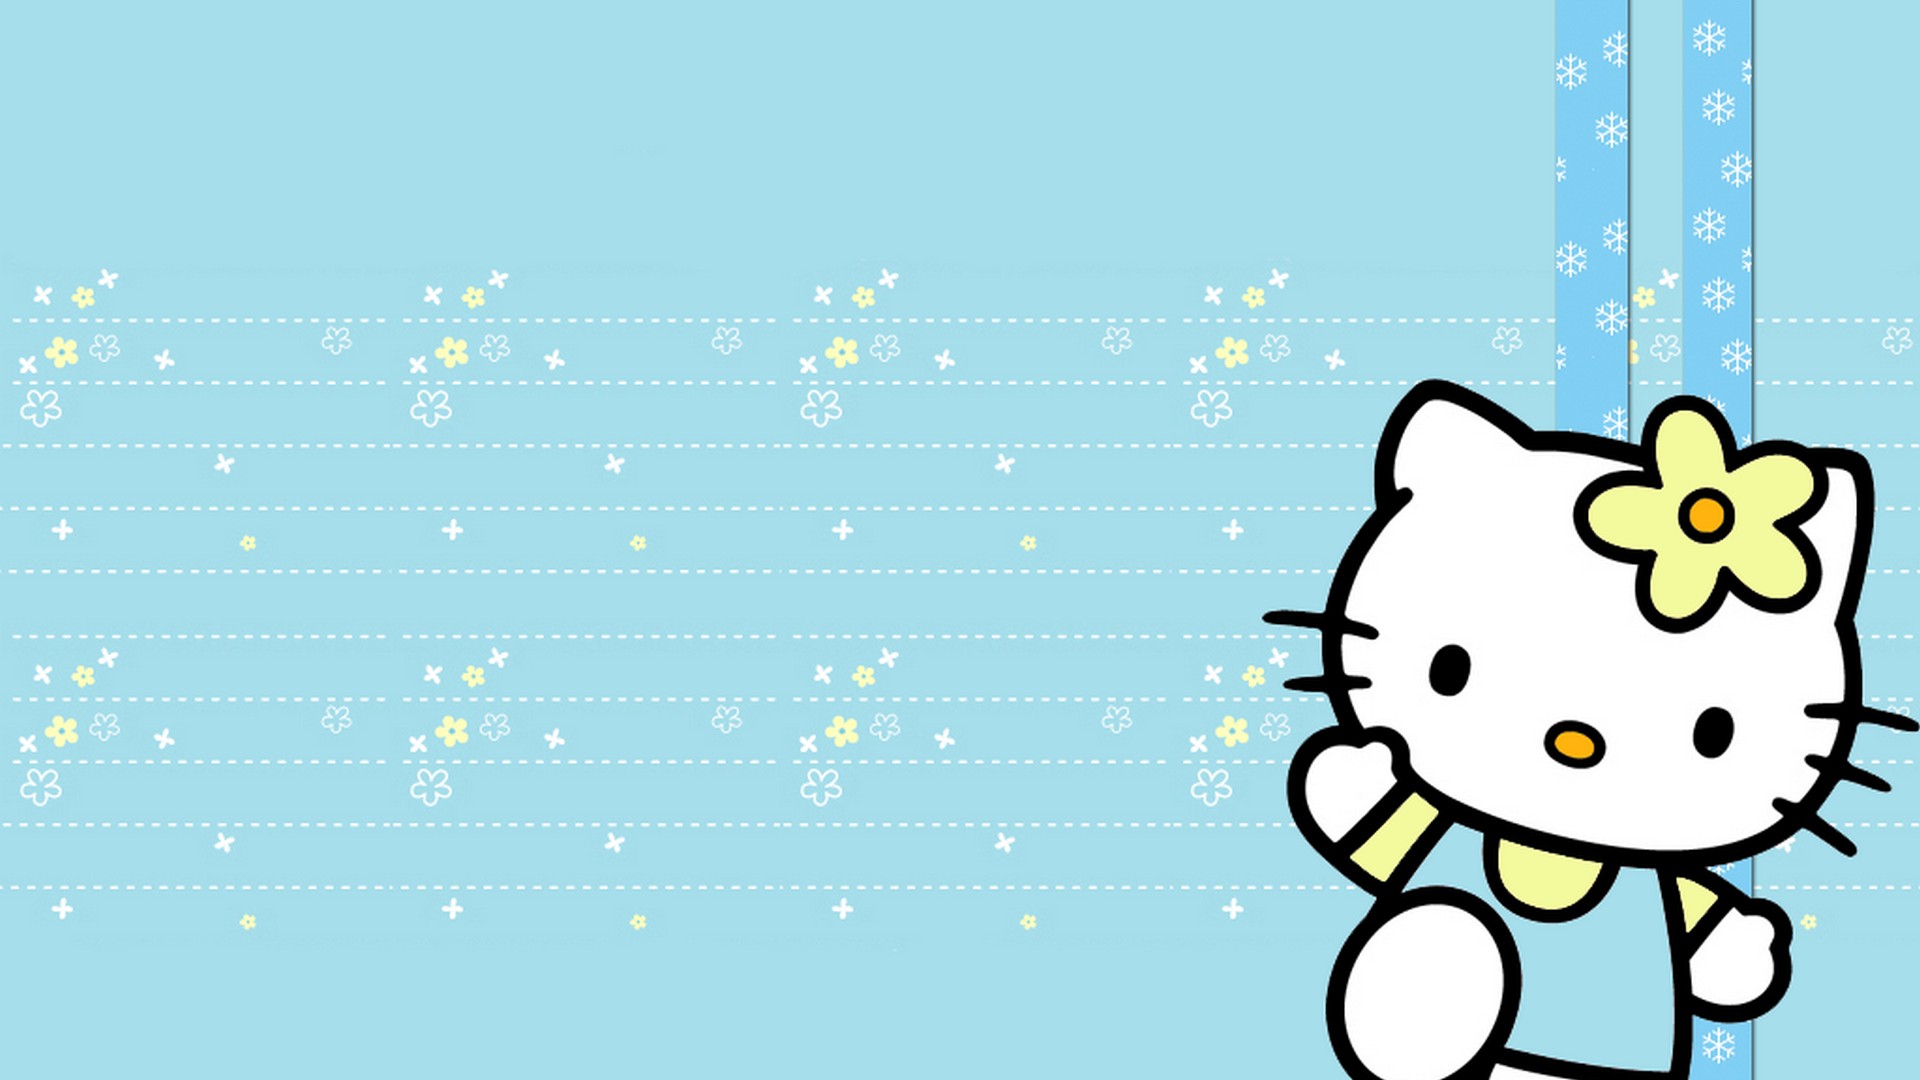 Best Kitty Wallpaper with image resolution 1920x1080 pixel. You can use this wallpaper as background for your desktop Computer Screensavers, Android or iPhone smartphones